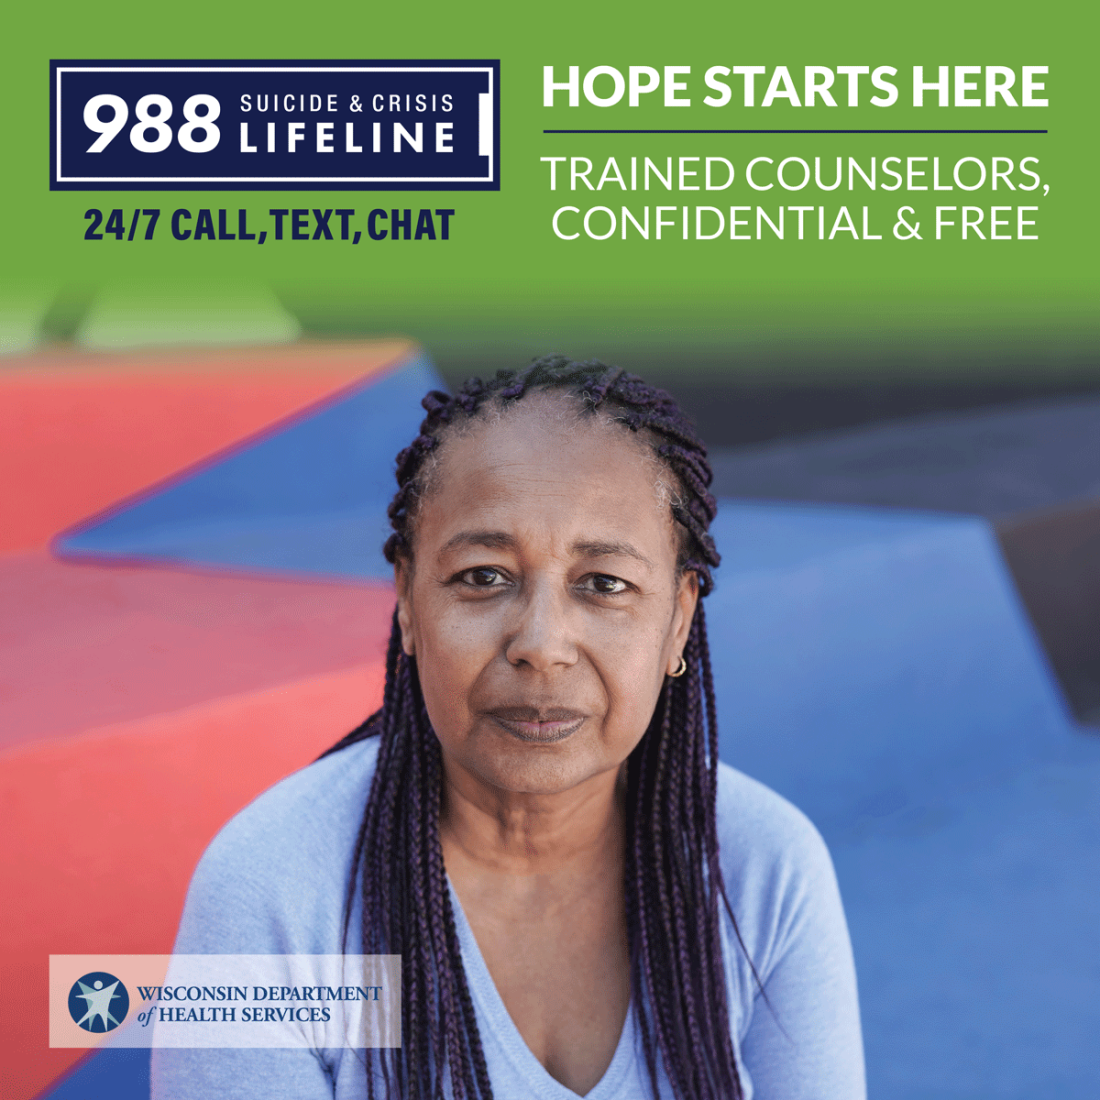 Adult - Hope starts here - 988 Suicide & Crisis Lifeline 24/7 Call, Text, Chat